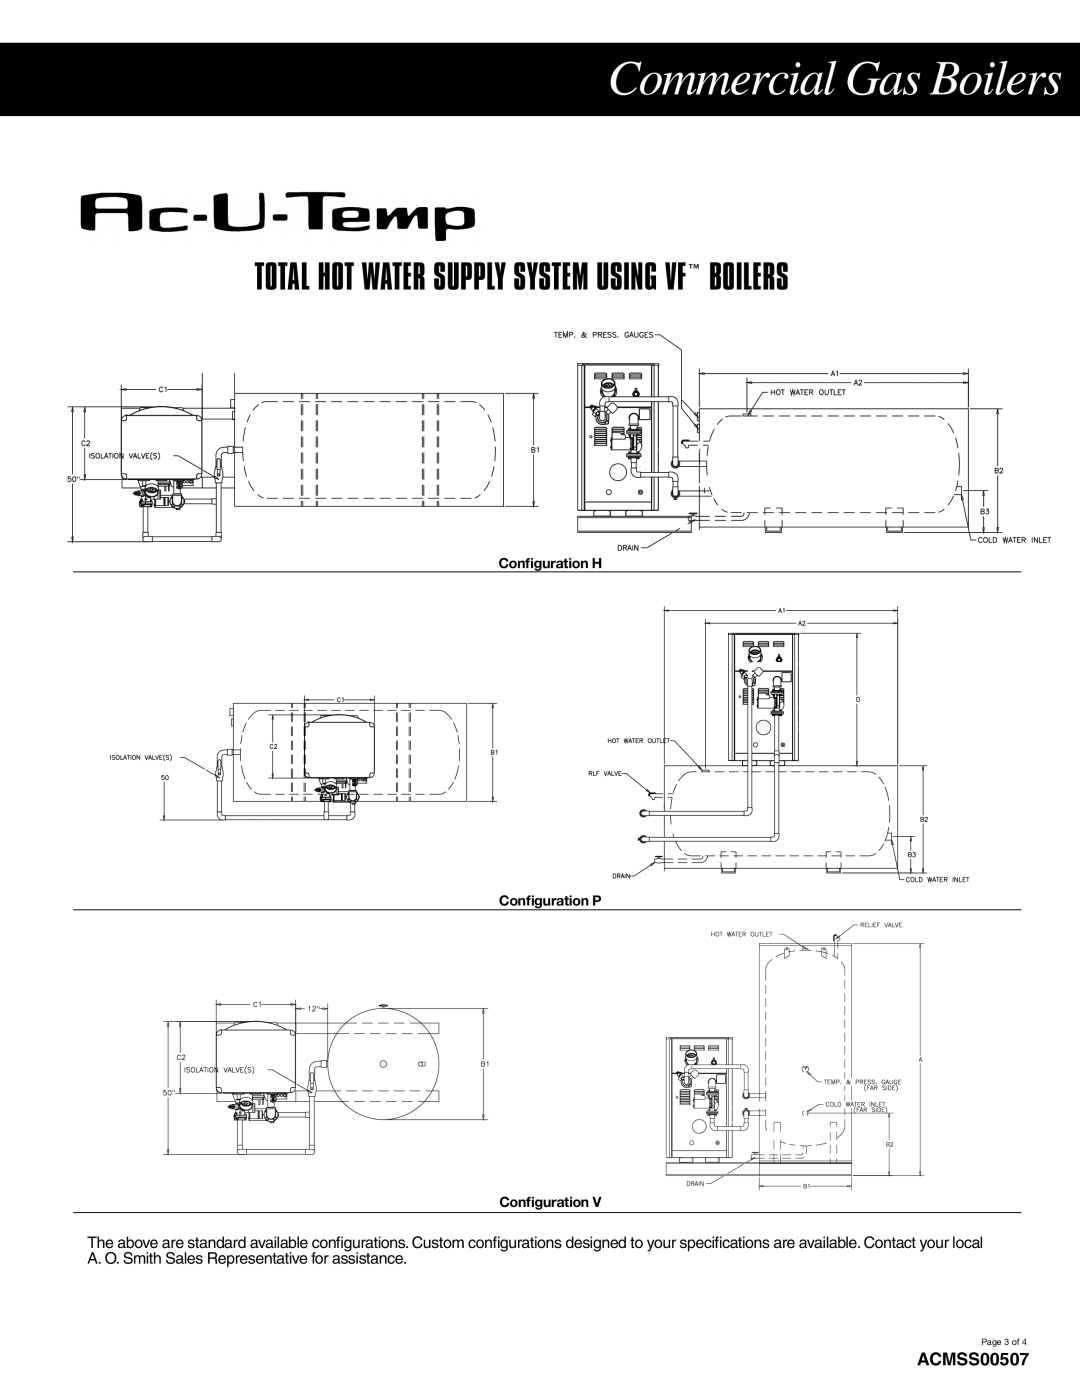 A.O. Smith VWT-500, VWT-1000 Total Hot Water Supply System Using Vf Boilers, Commercial Gas Boilers, ACMSS00507, Page 3 of 